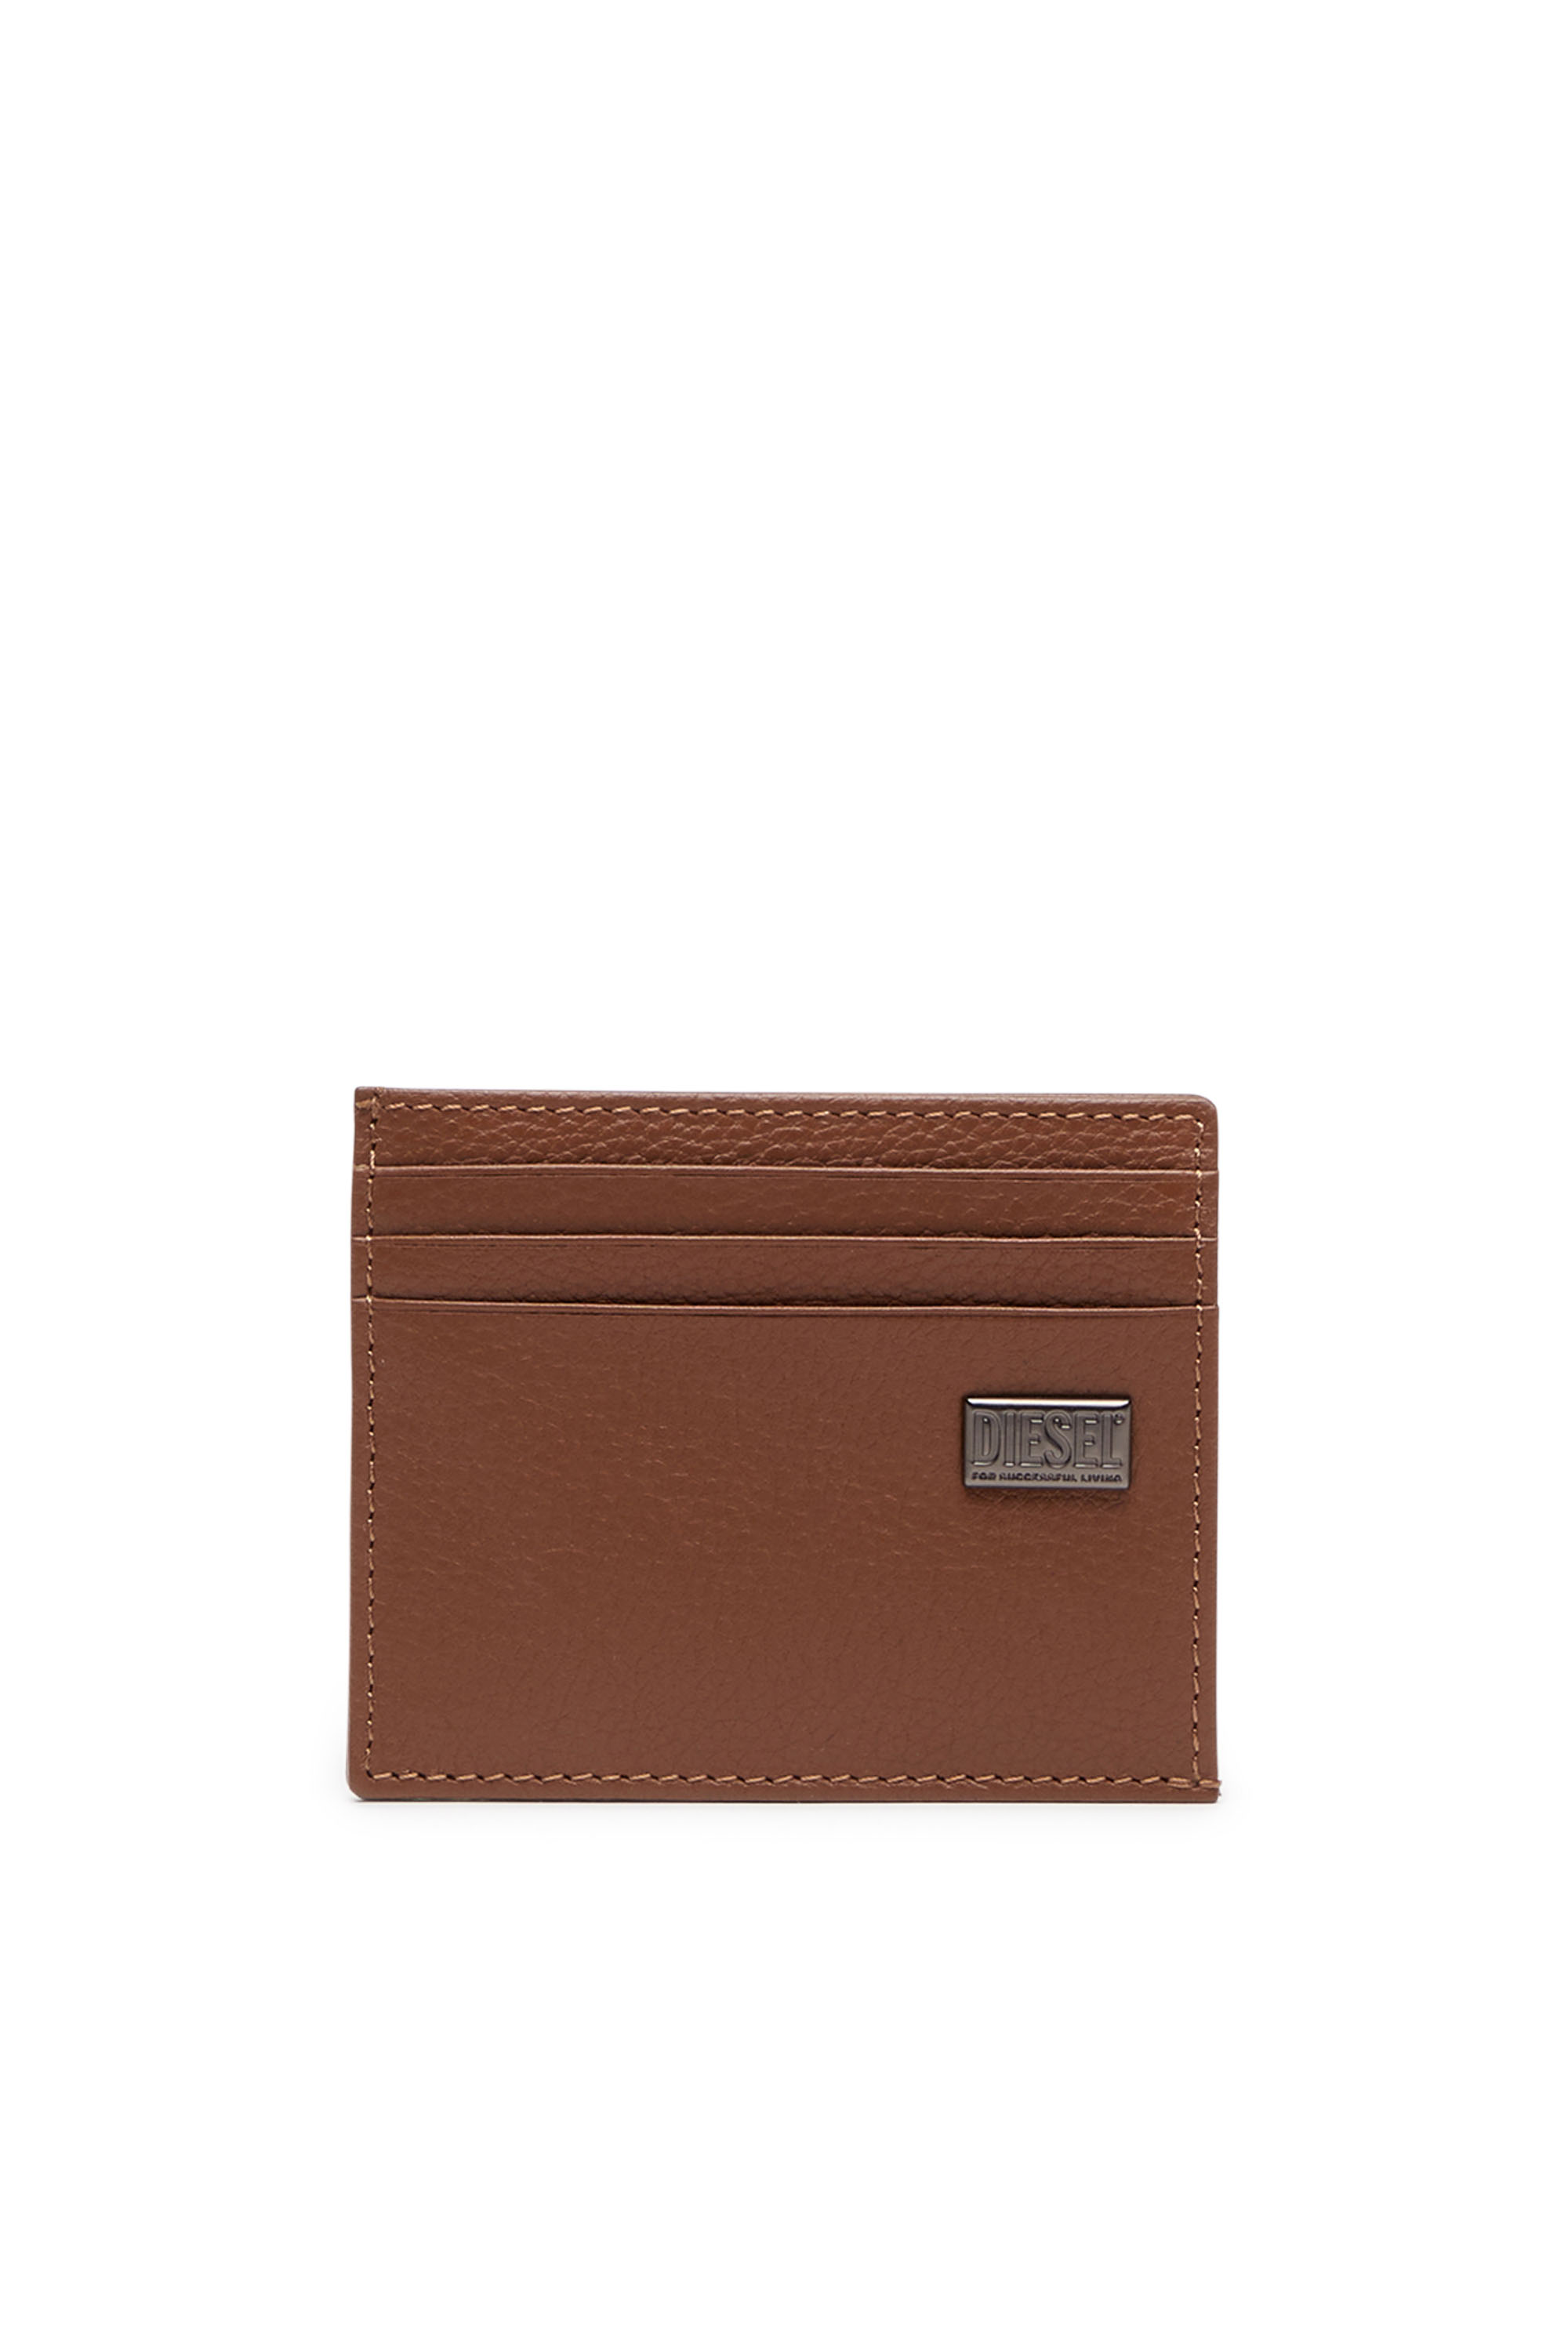 Diesel - Card holder in grainy leather - Small Wallets - Man - Brown